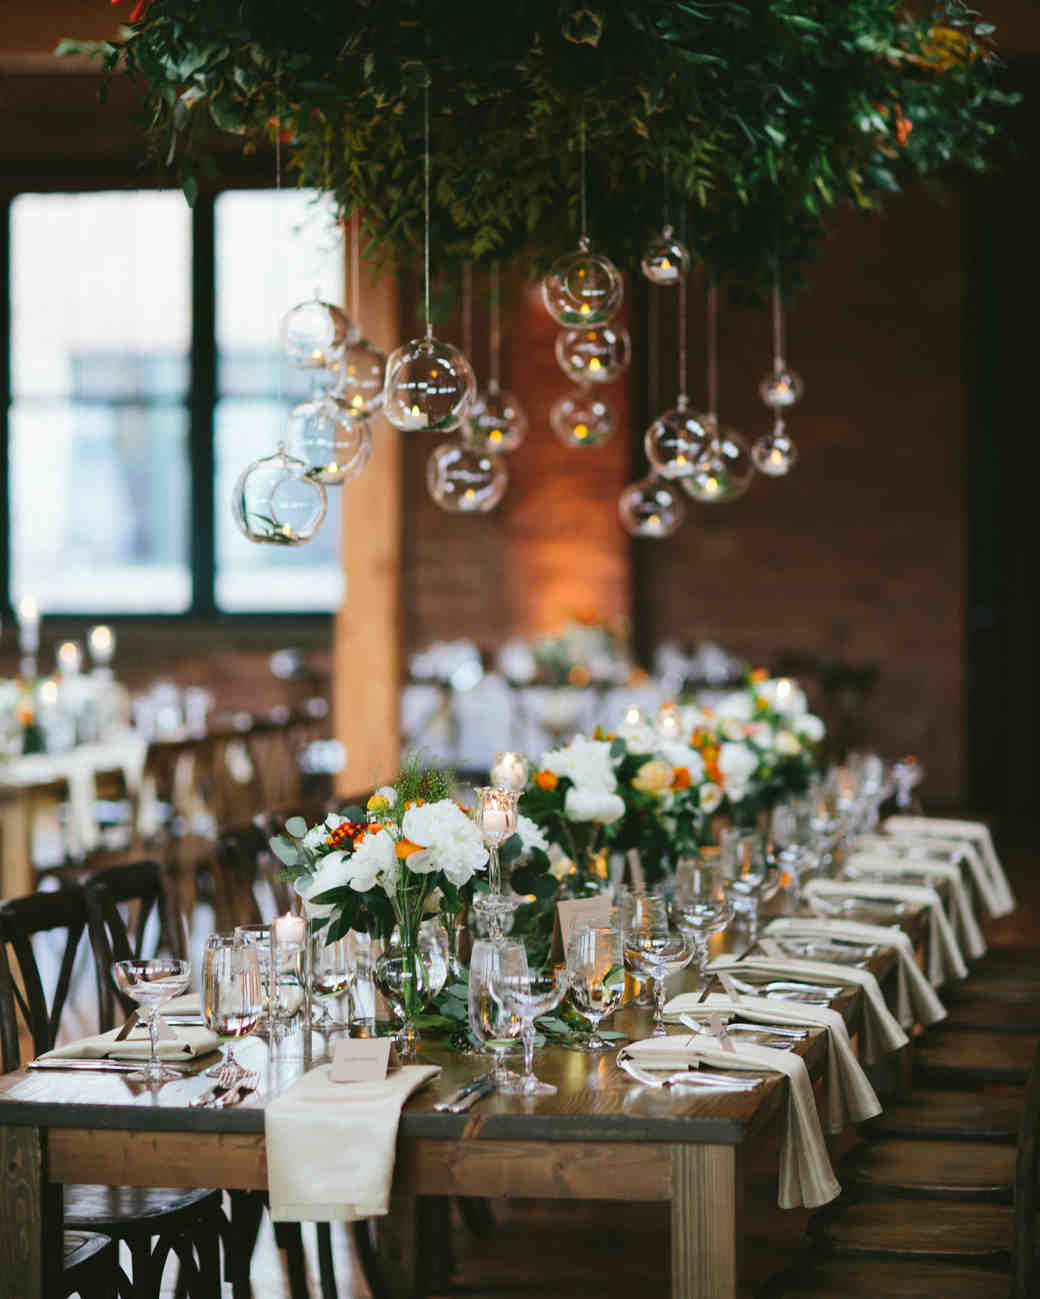 Unique 85 of Ideas For Head Table At Wedding elisevunif